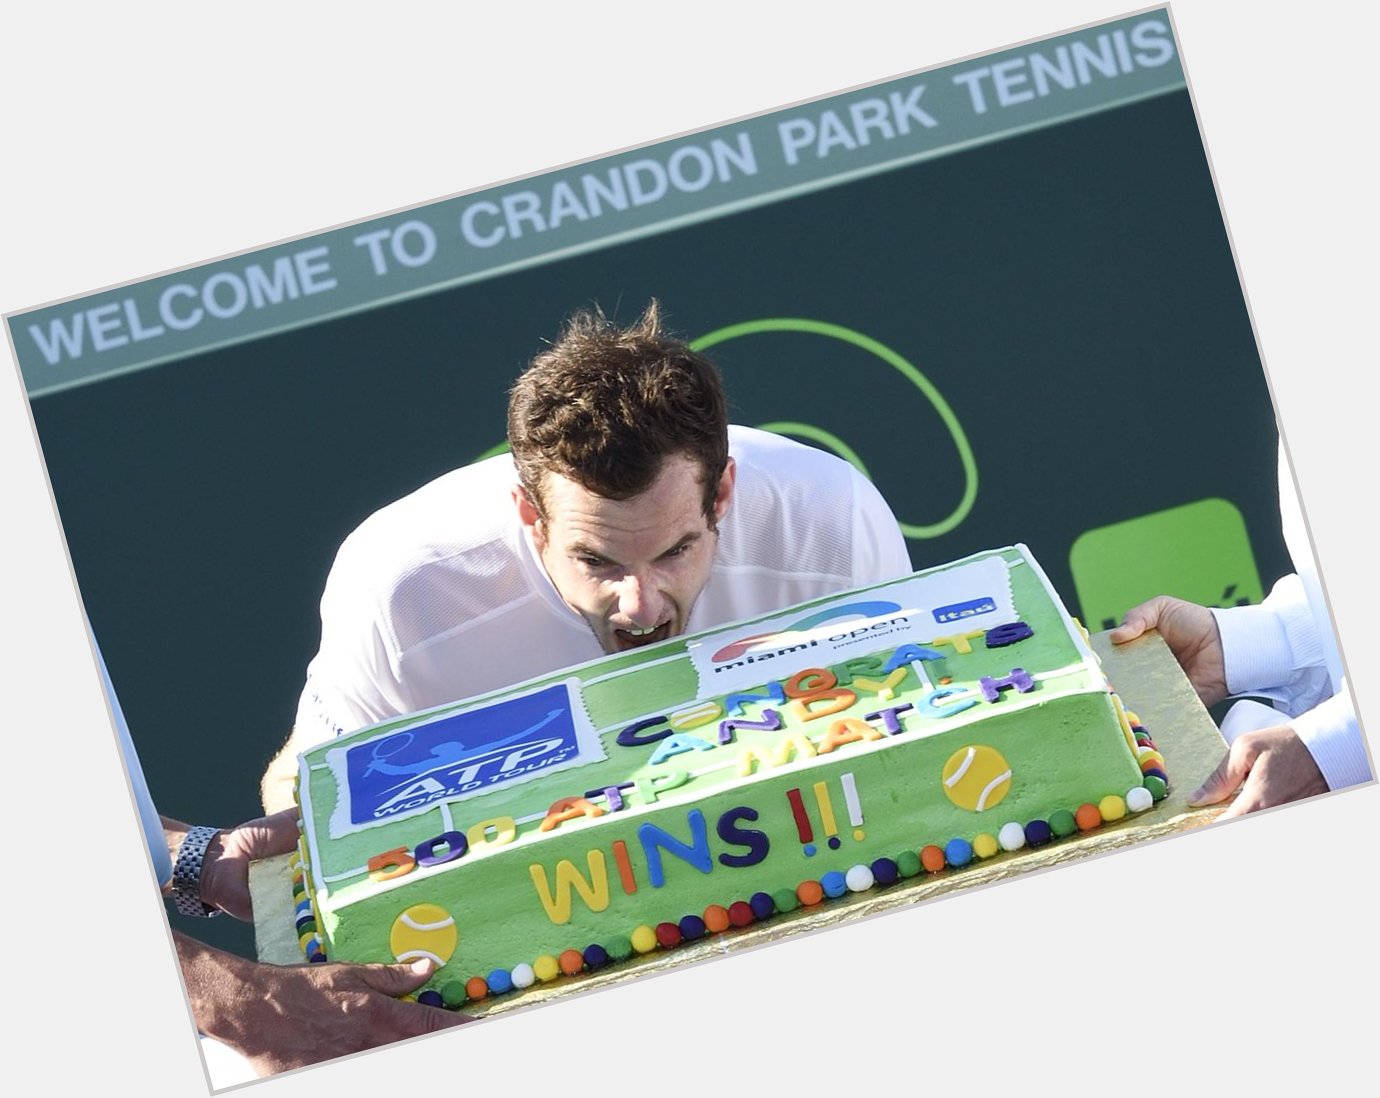 Happy Birthday to two-time Champ, Gift idea: Crandon Park frequent visitor punch card?  